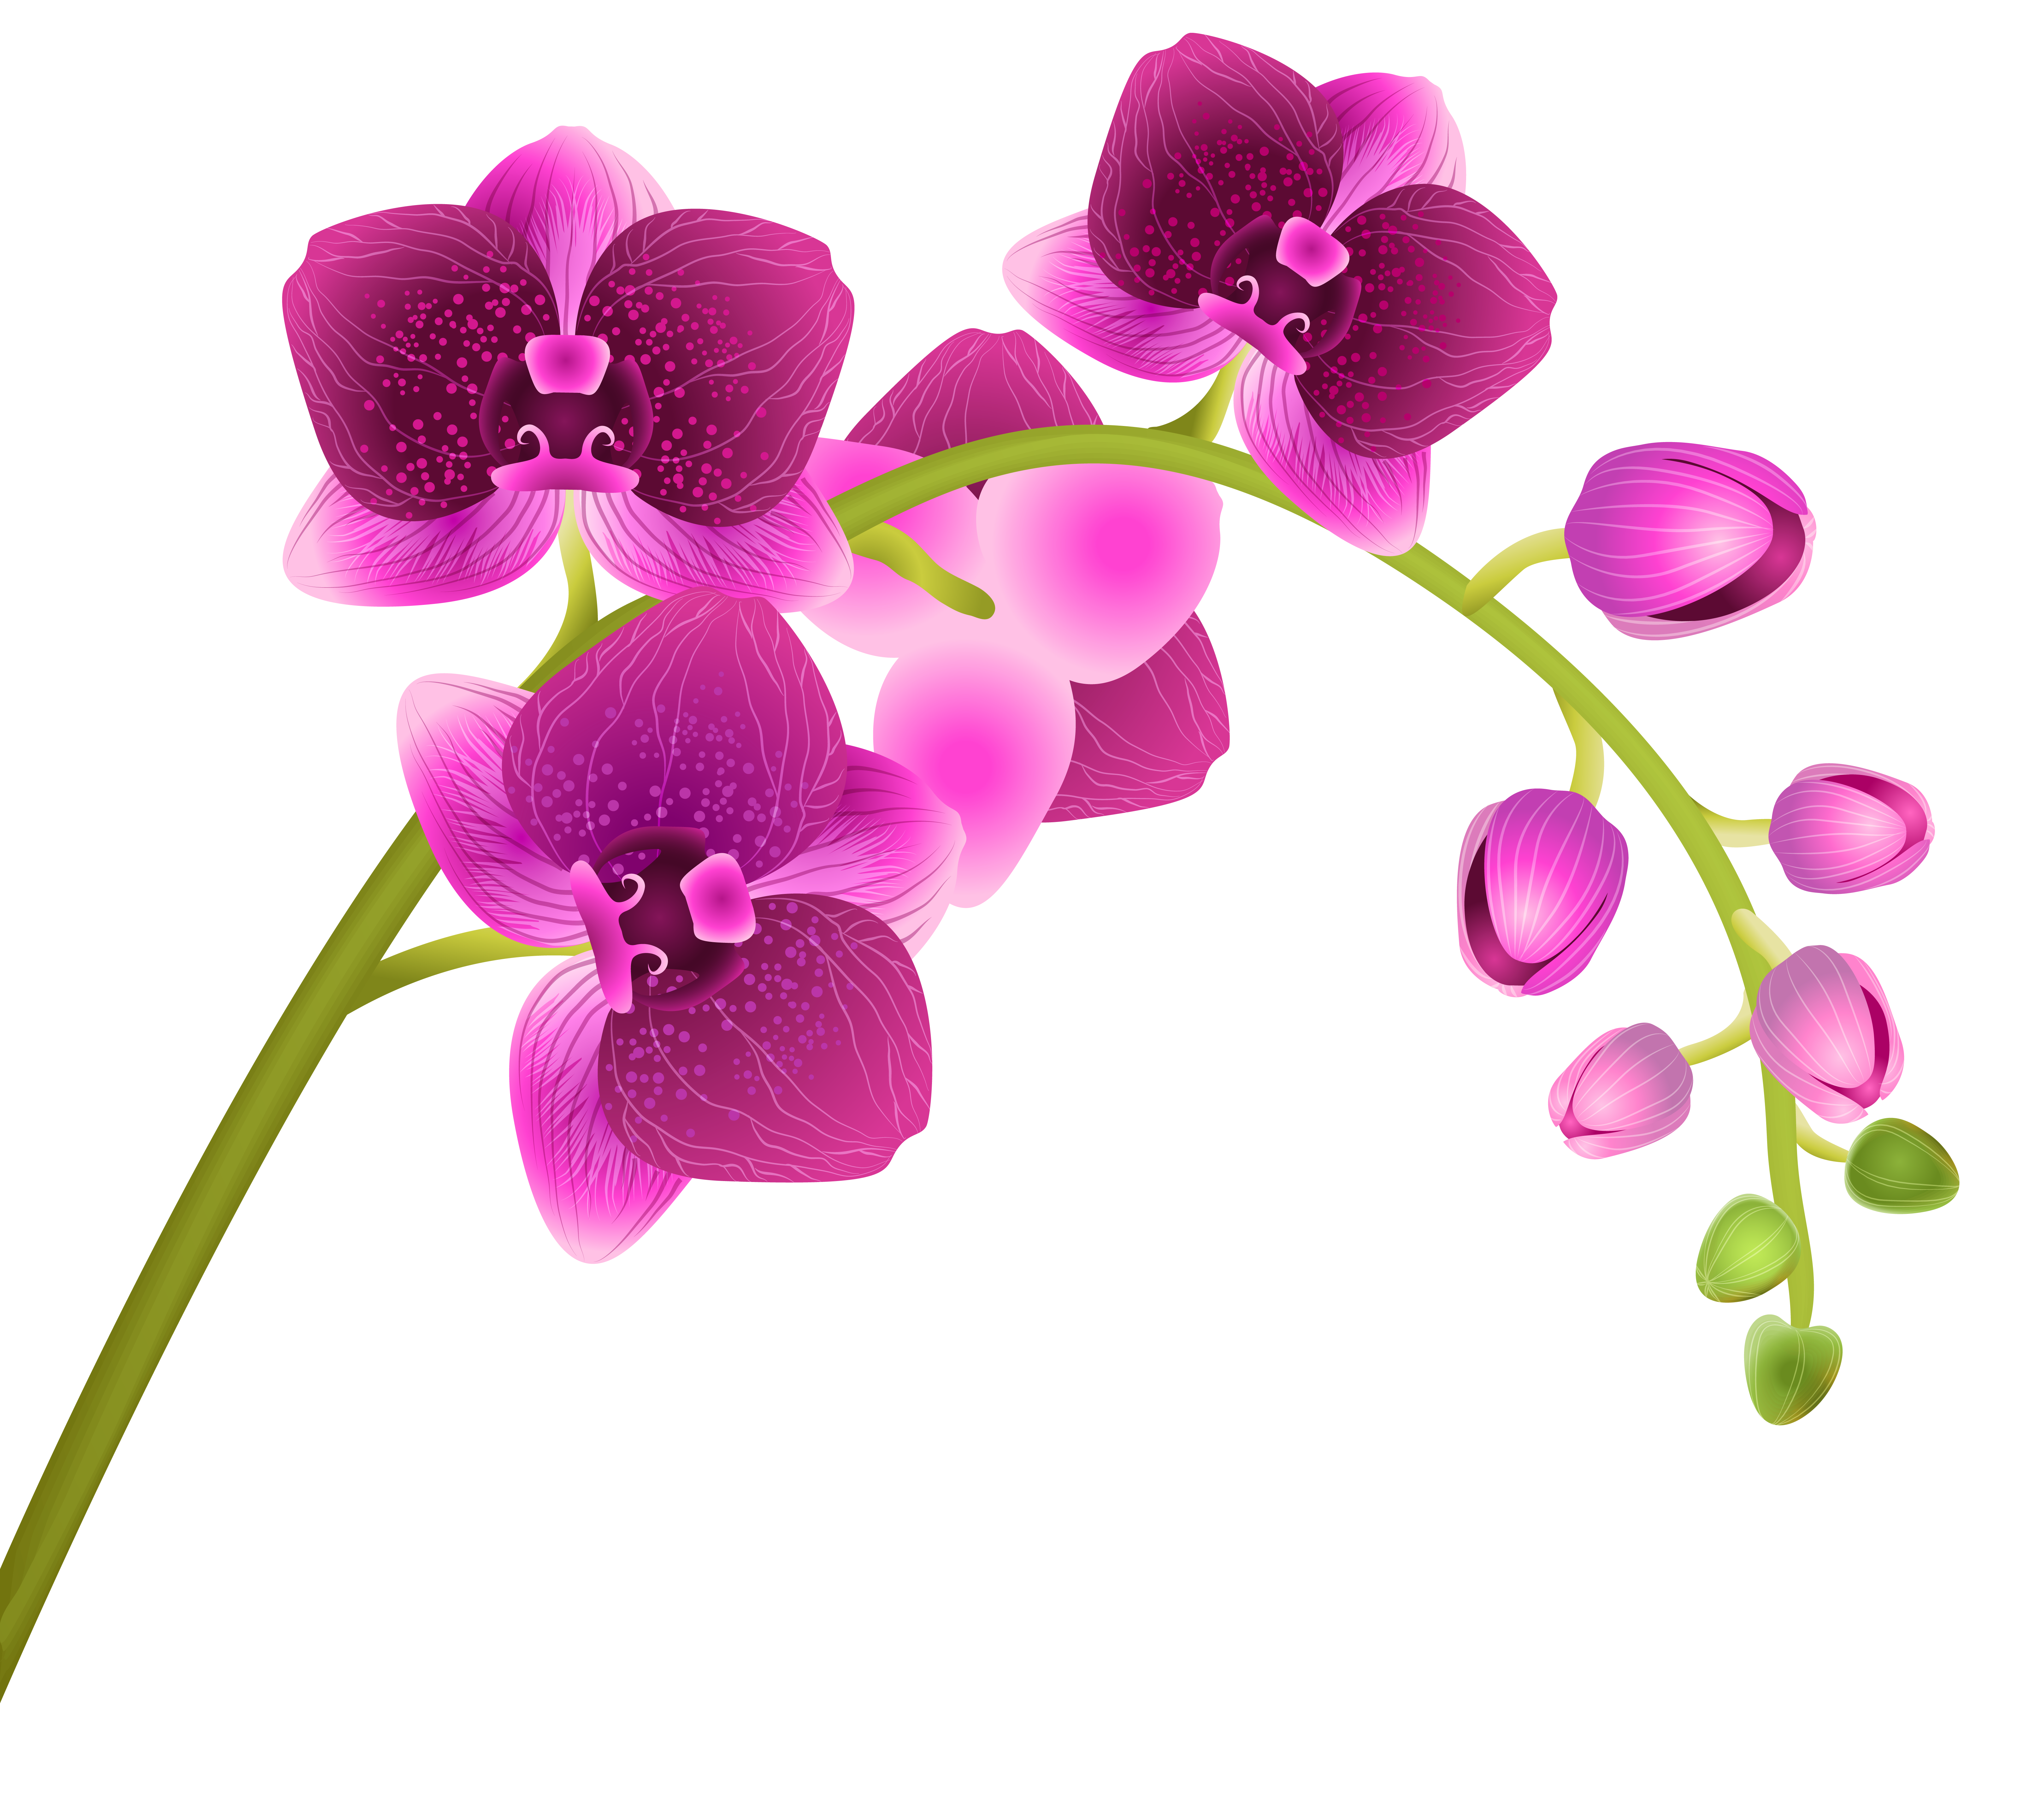 Free Images Of Orchids : Find the best free stock images about orchid ...